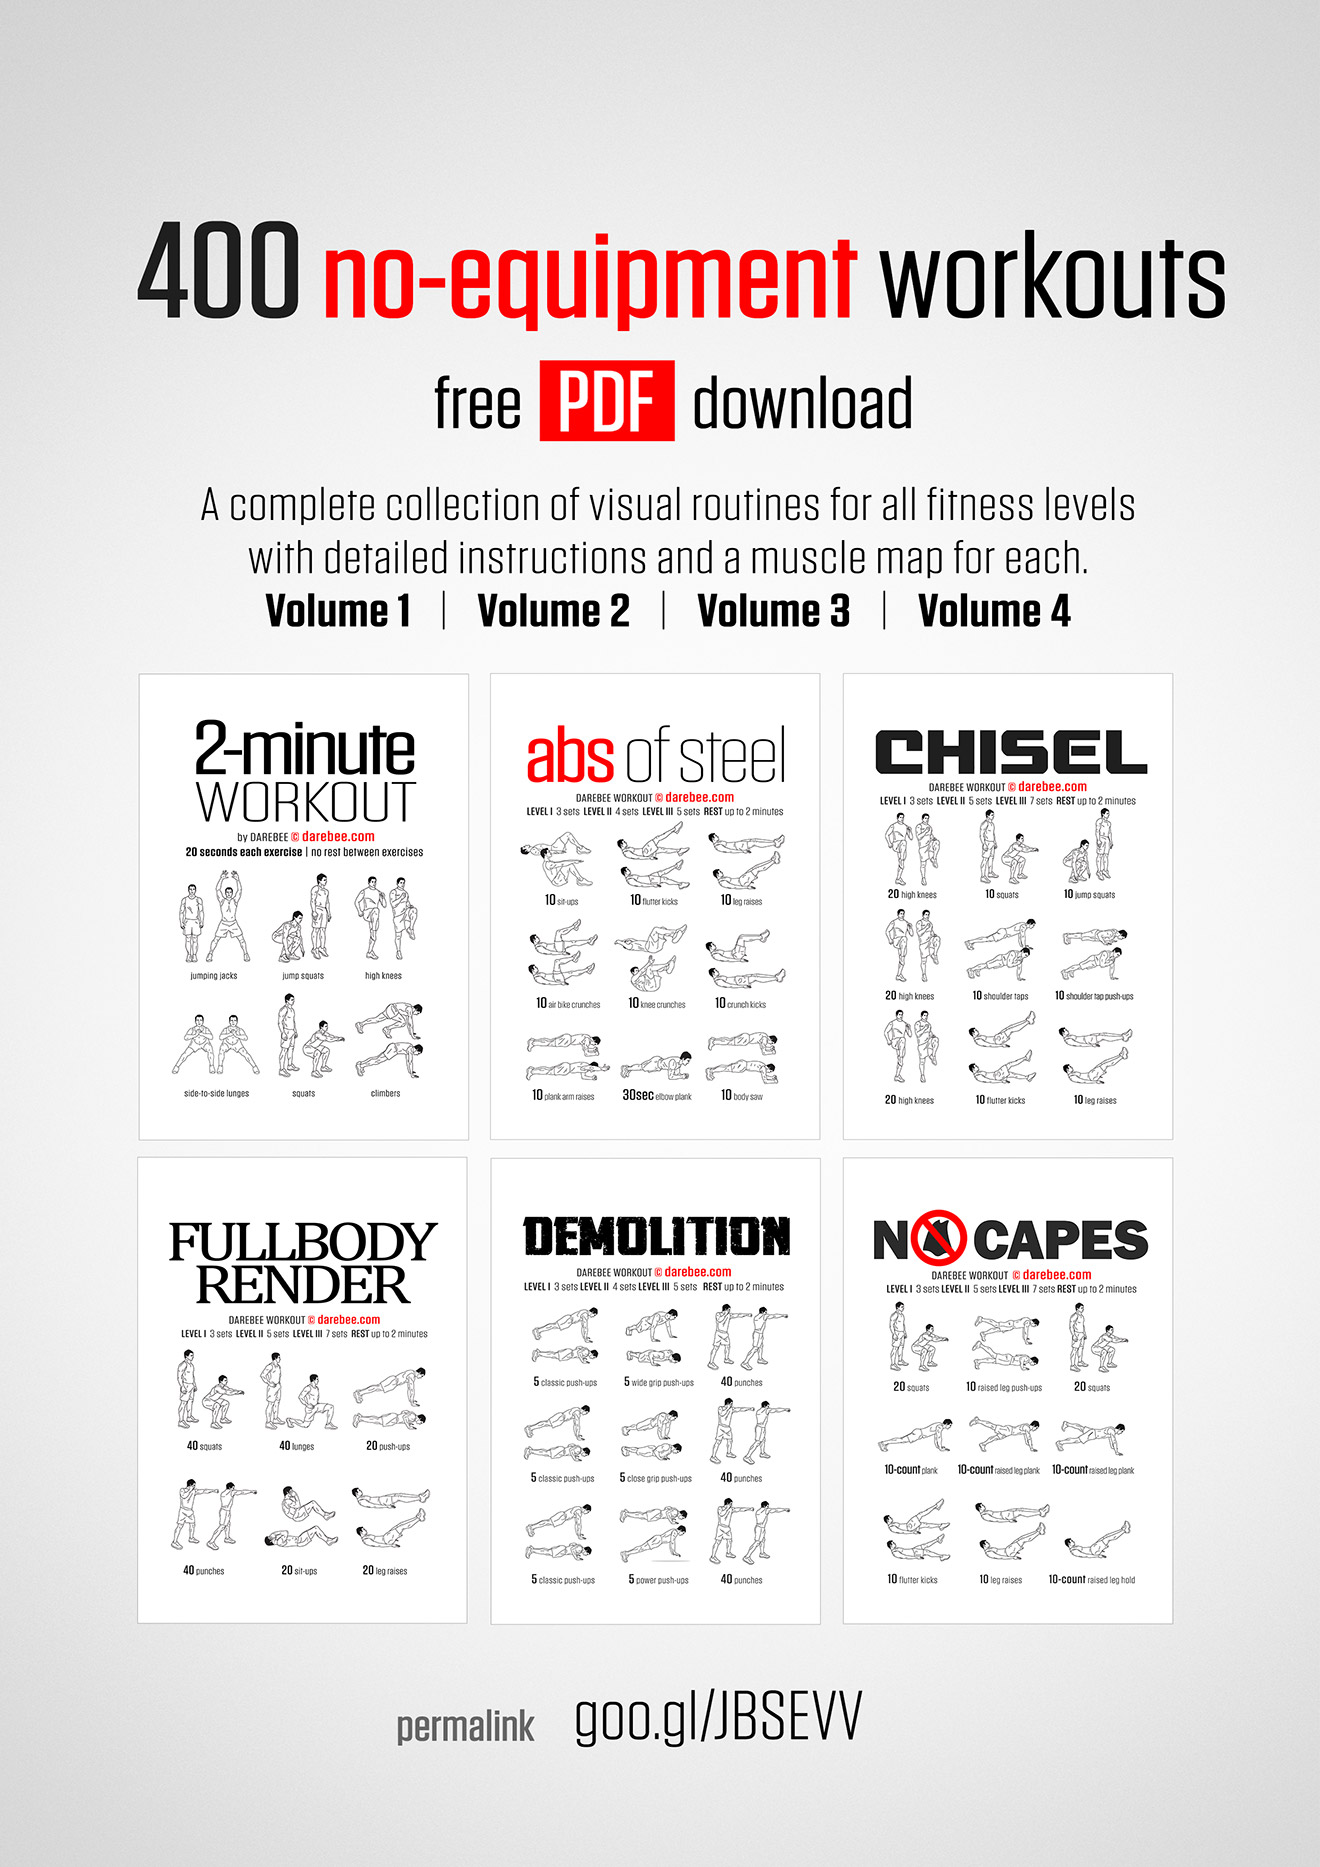 400 no-equipment home fitness workouts, field-tested by DAREBEE volunteers, designed to help you get fitter and healthier at home, without any equipment.